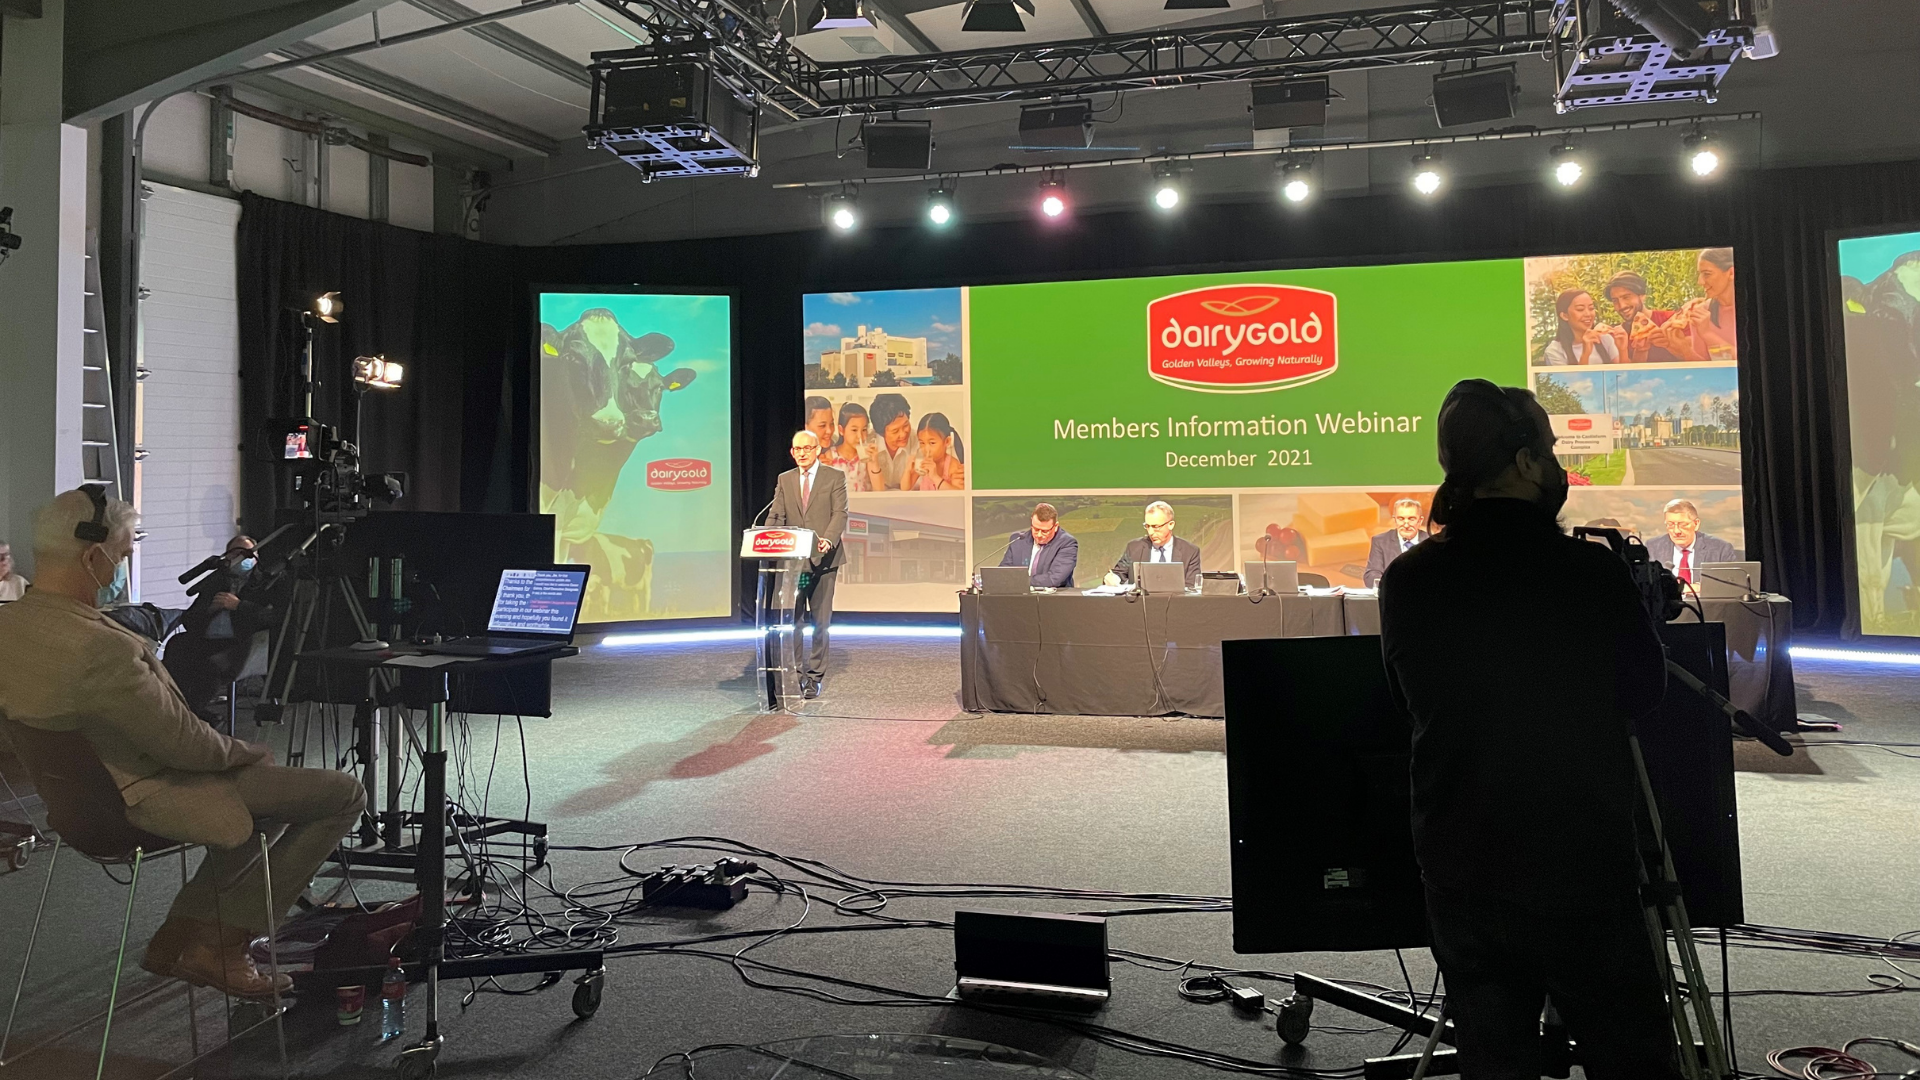 Annual General meeting of Dairygold. Dairygold AGM was produced on the Main stage in VE Studio the meeting went out live to all members.